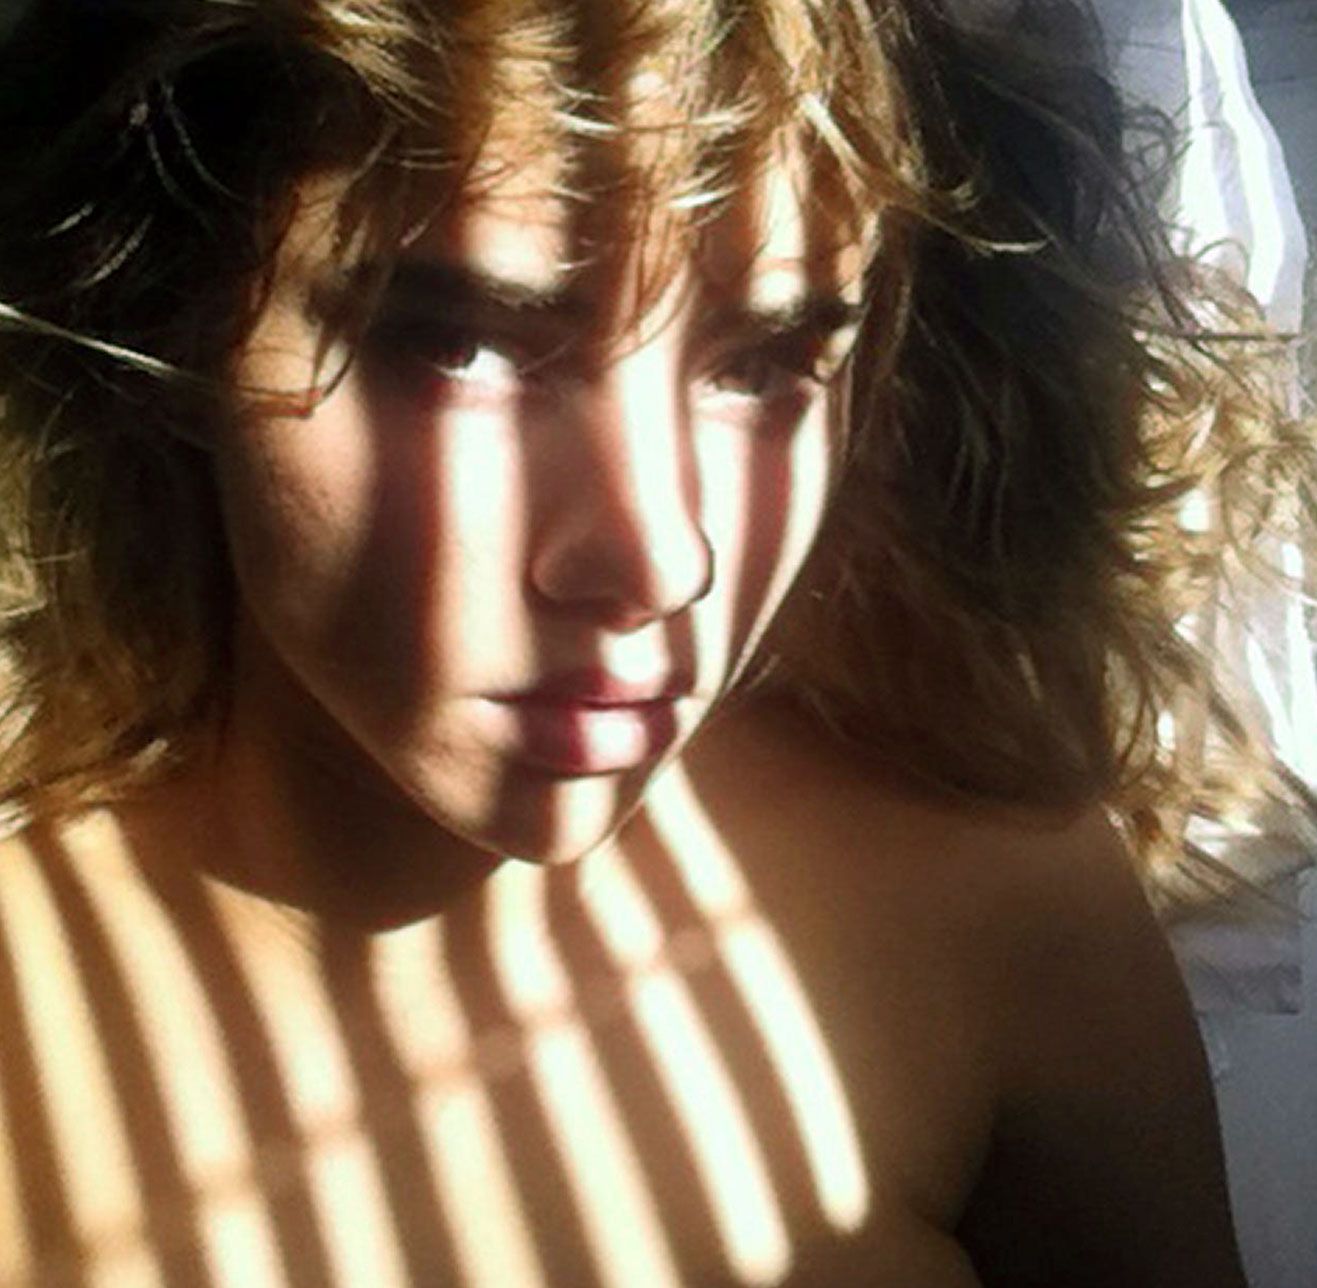 0907234845742_009_Suki-Waterhouse-nude-naked-sexy-topless-hot-cleavage-10-4-thefappeningblog.com_.jpg